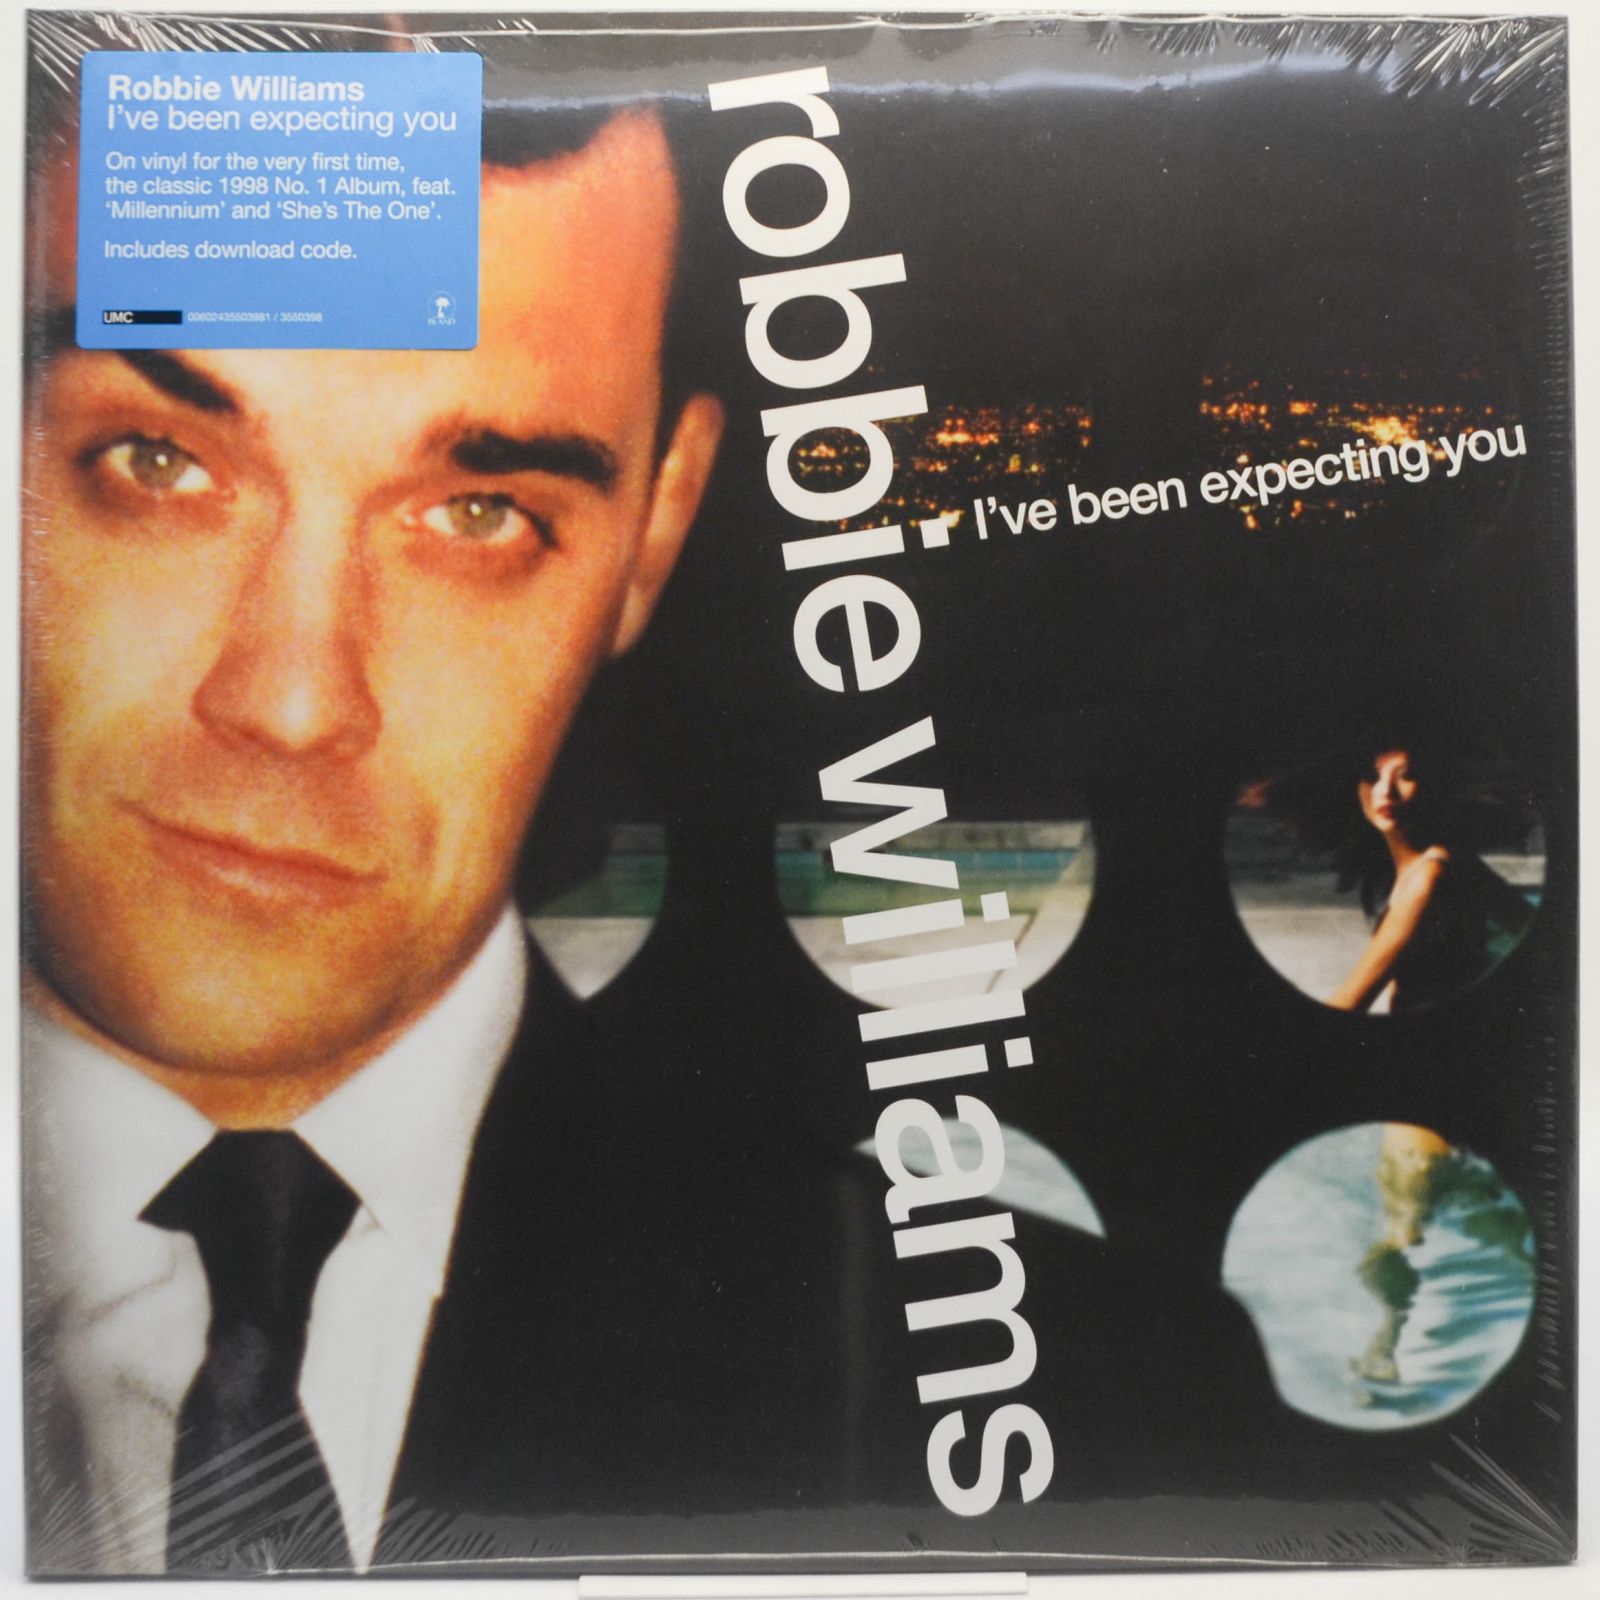 Robbie Williams — I've Been Expecting You, 1998